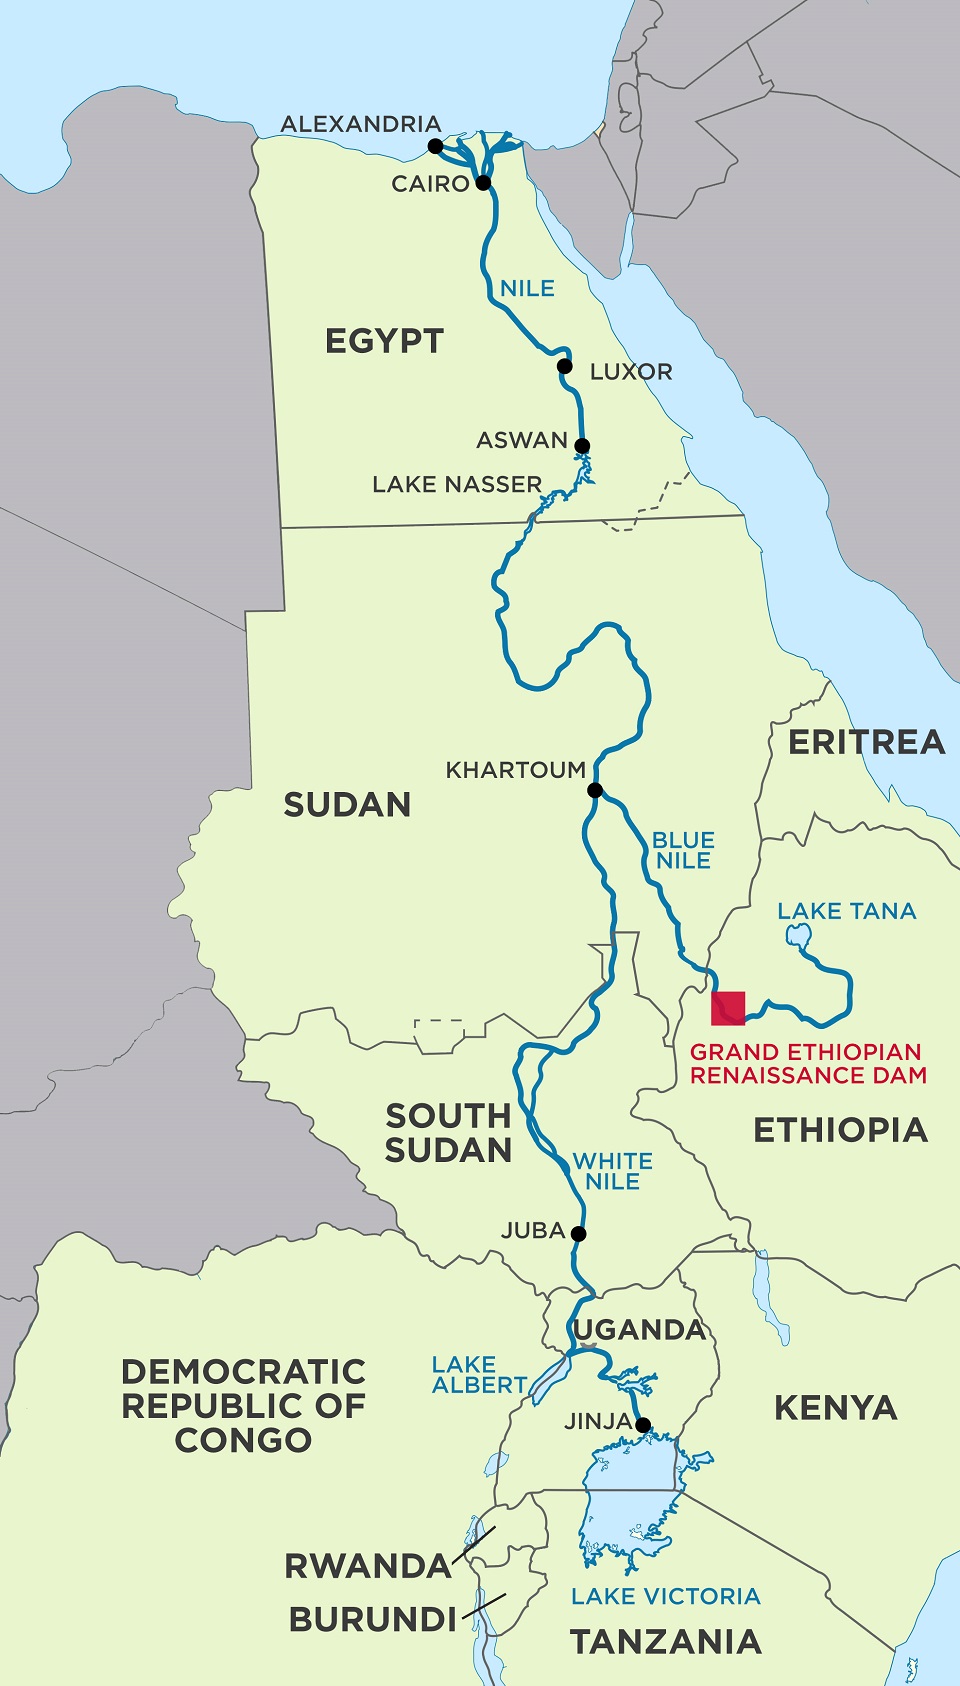 Sudan authorities support while public fears Africa’s largest dam